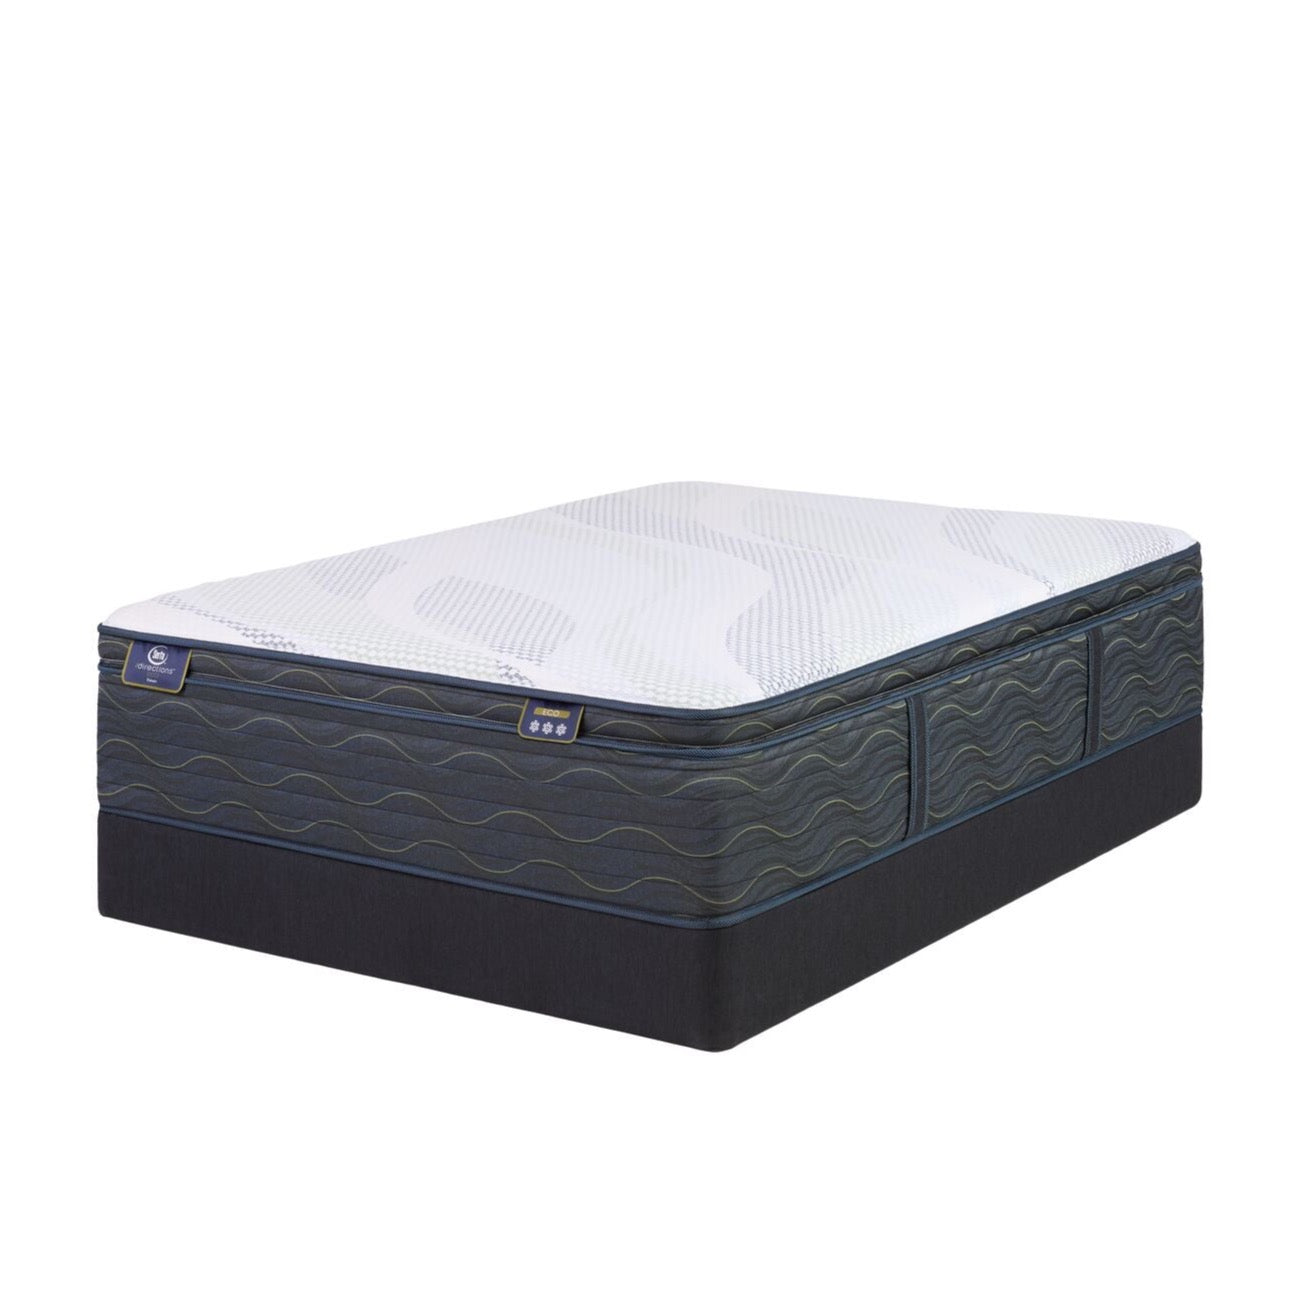 Picture of Serta iDirectionsECO Darwin Pillow Top Hybrid Mattress